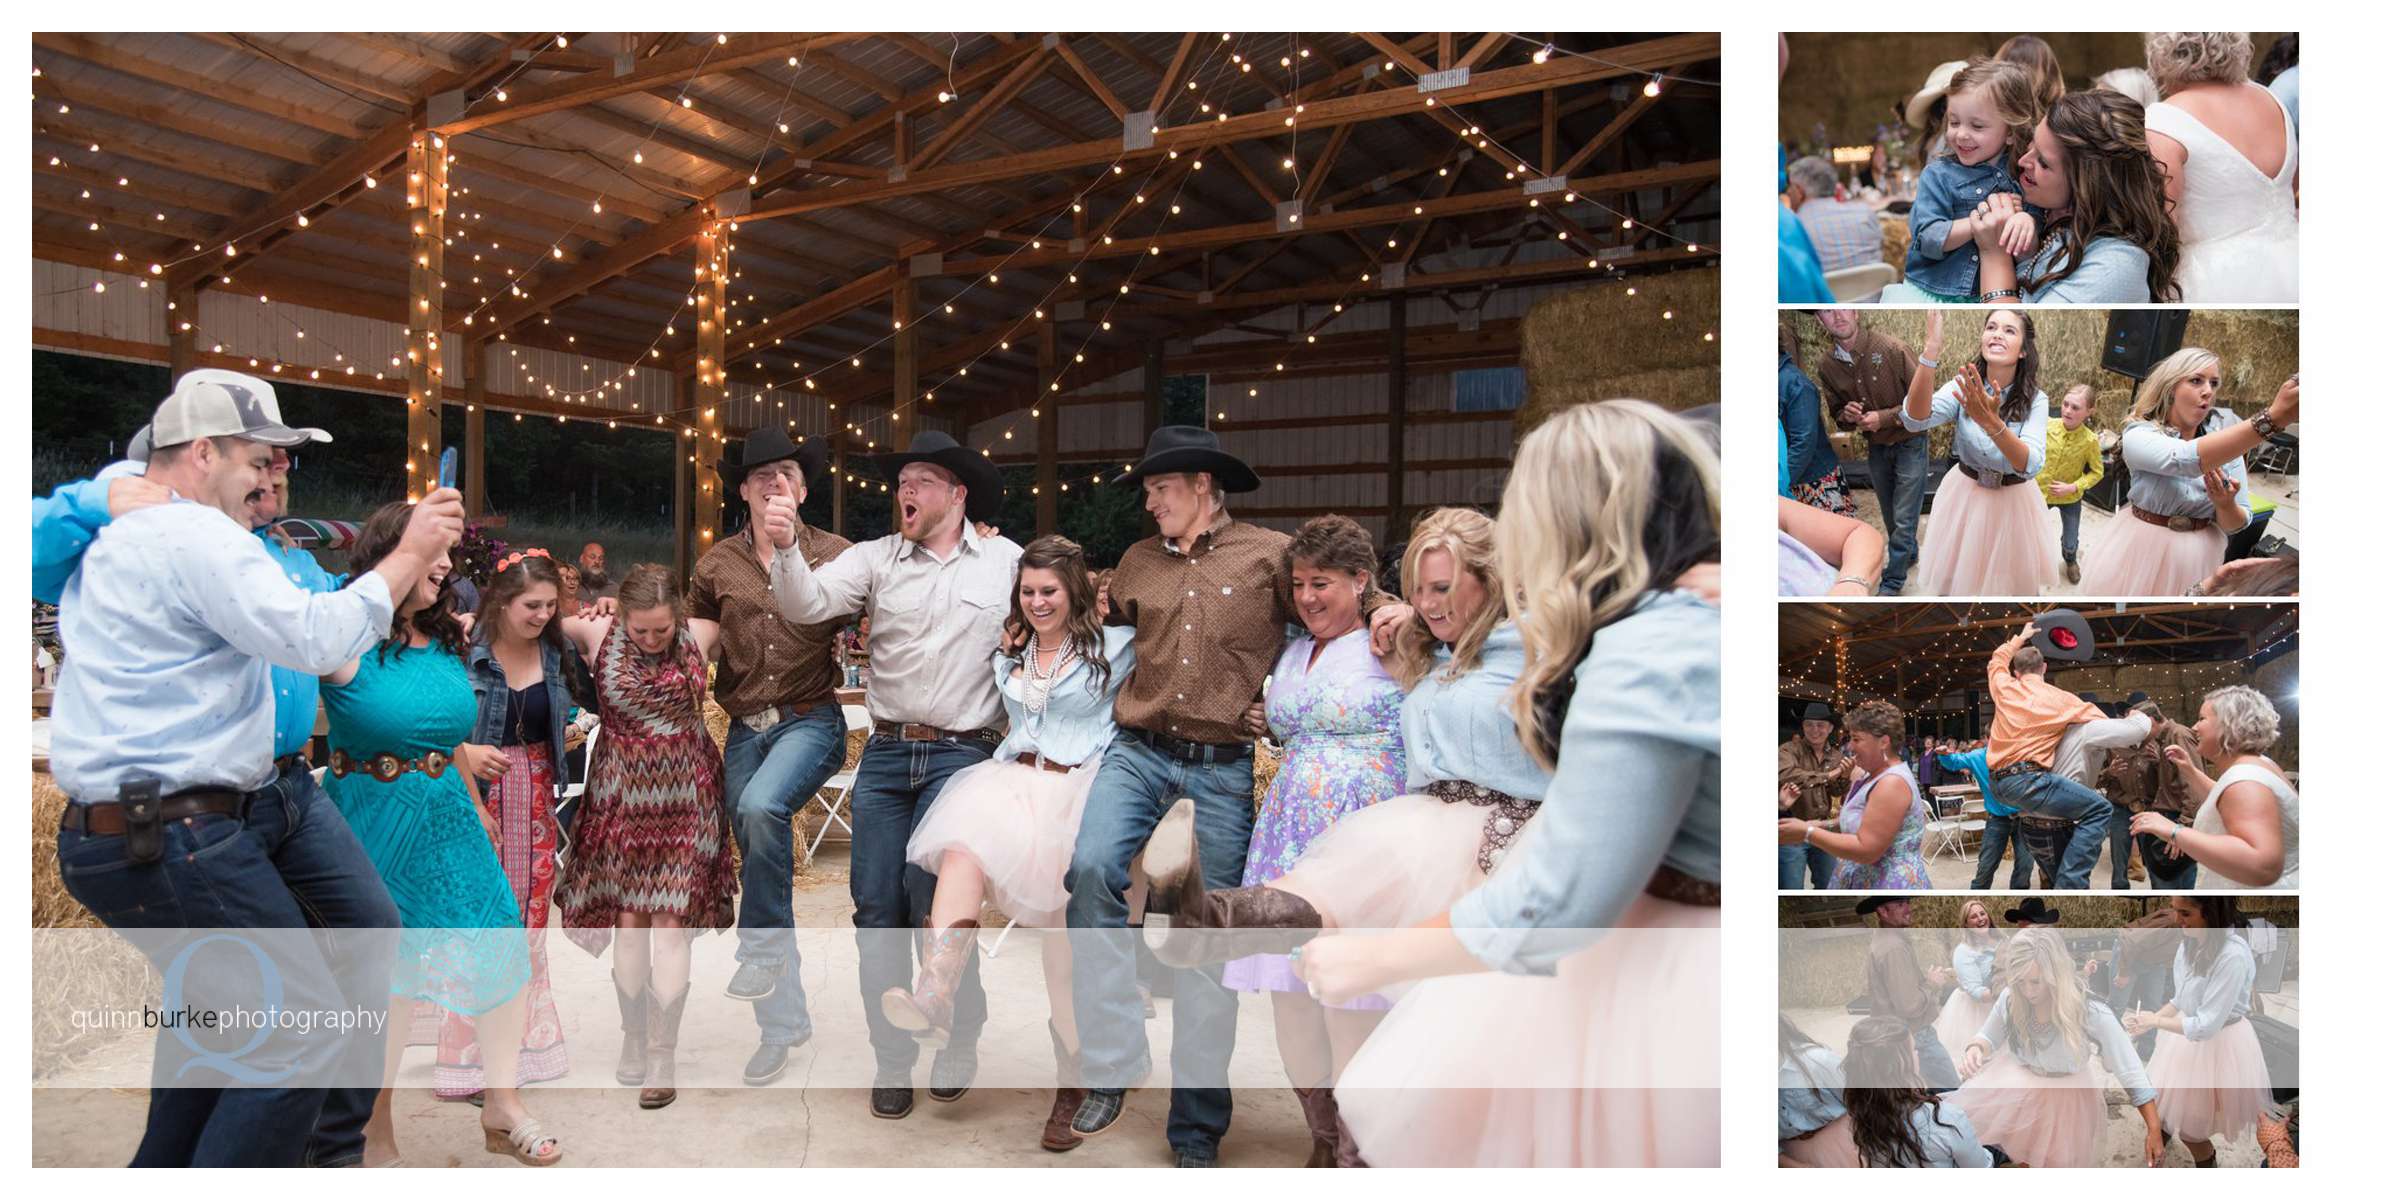 country line dancing at wedding reception